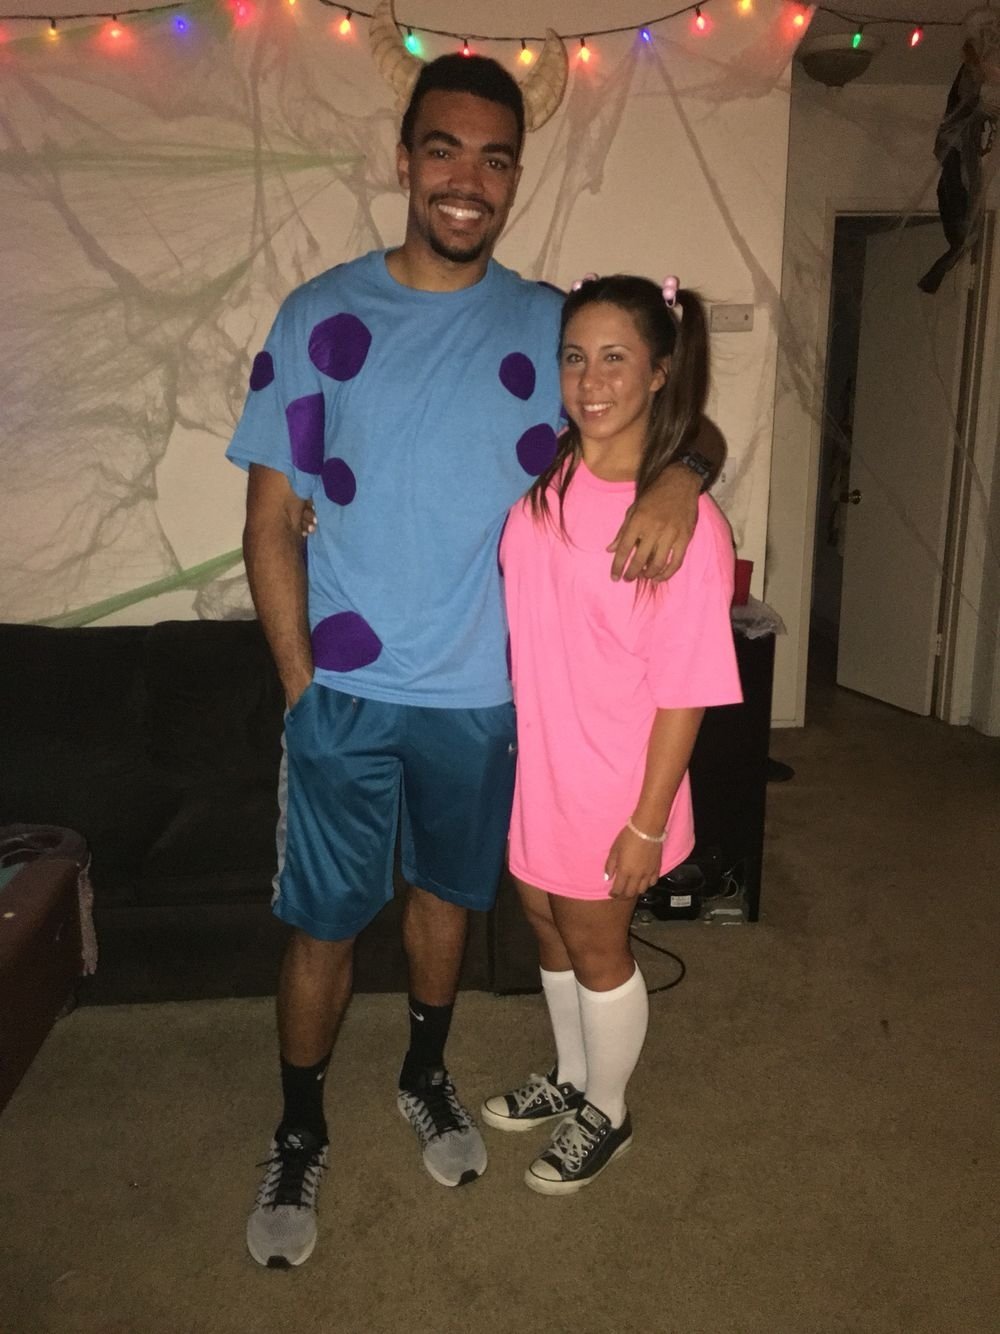 10 Most Recommended Homemade Halloween Costume Ideas For Couples homemade sully and boo costume for halloween collegestudentfunds 3 2022